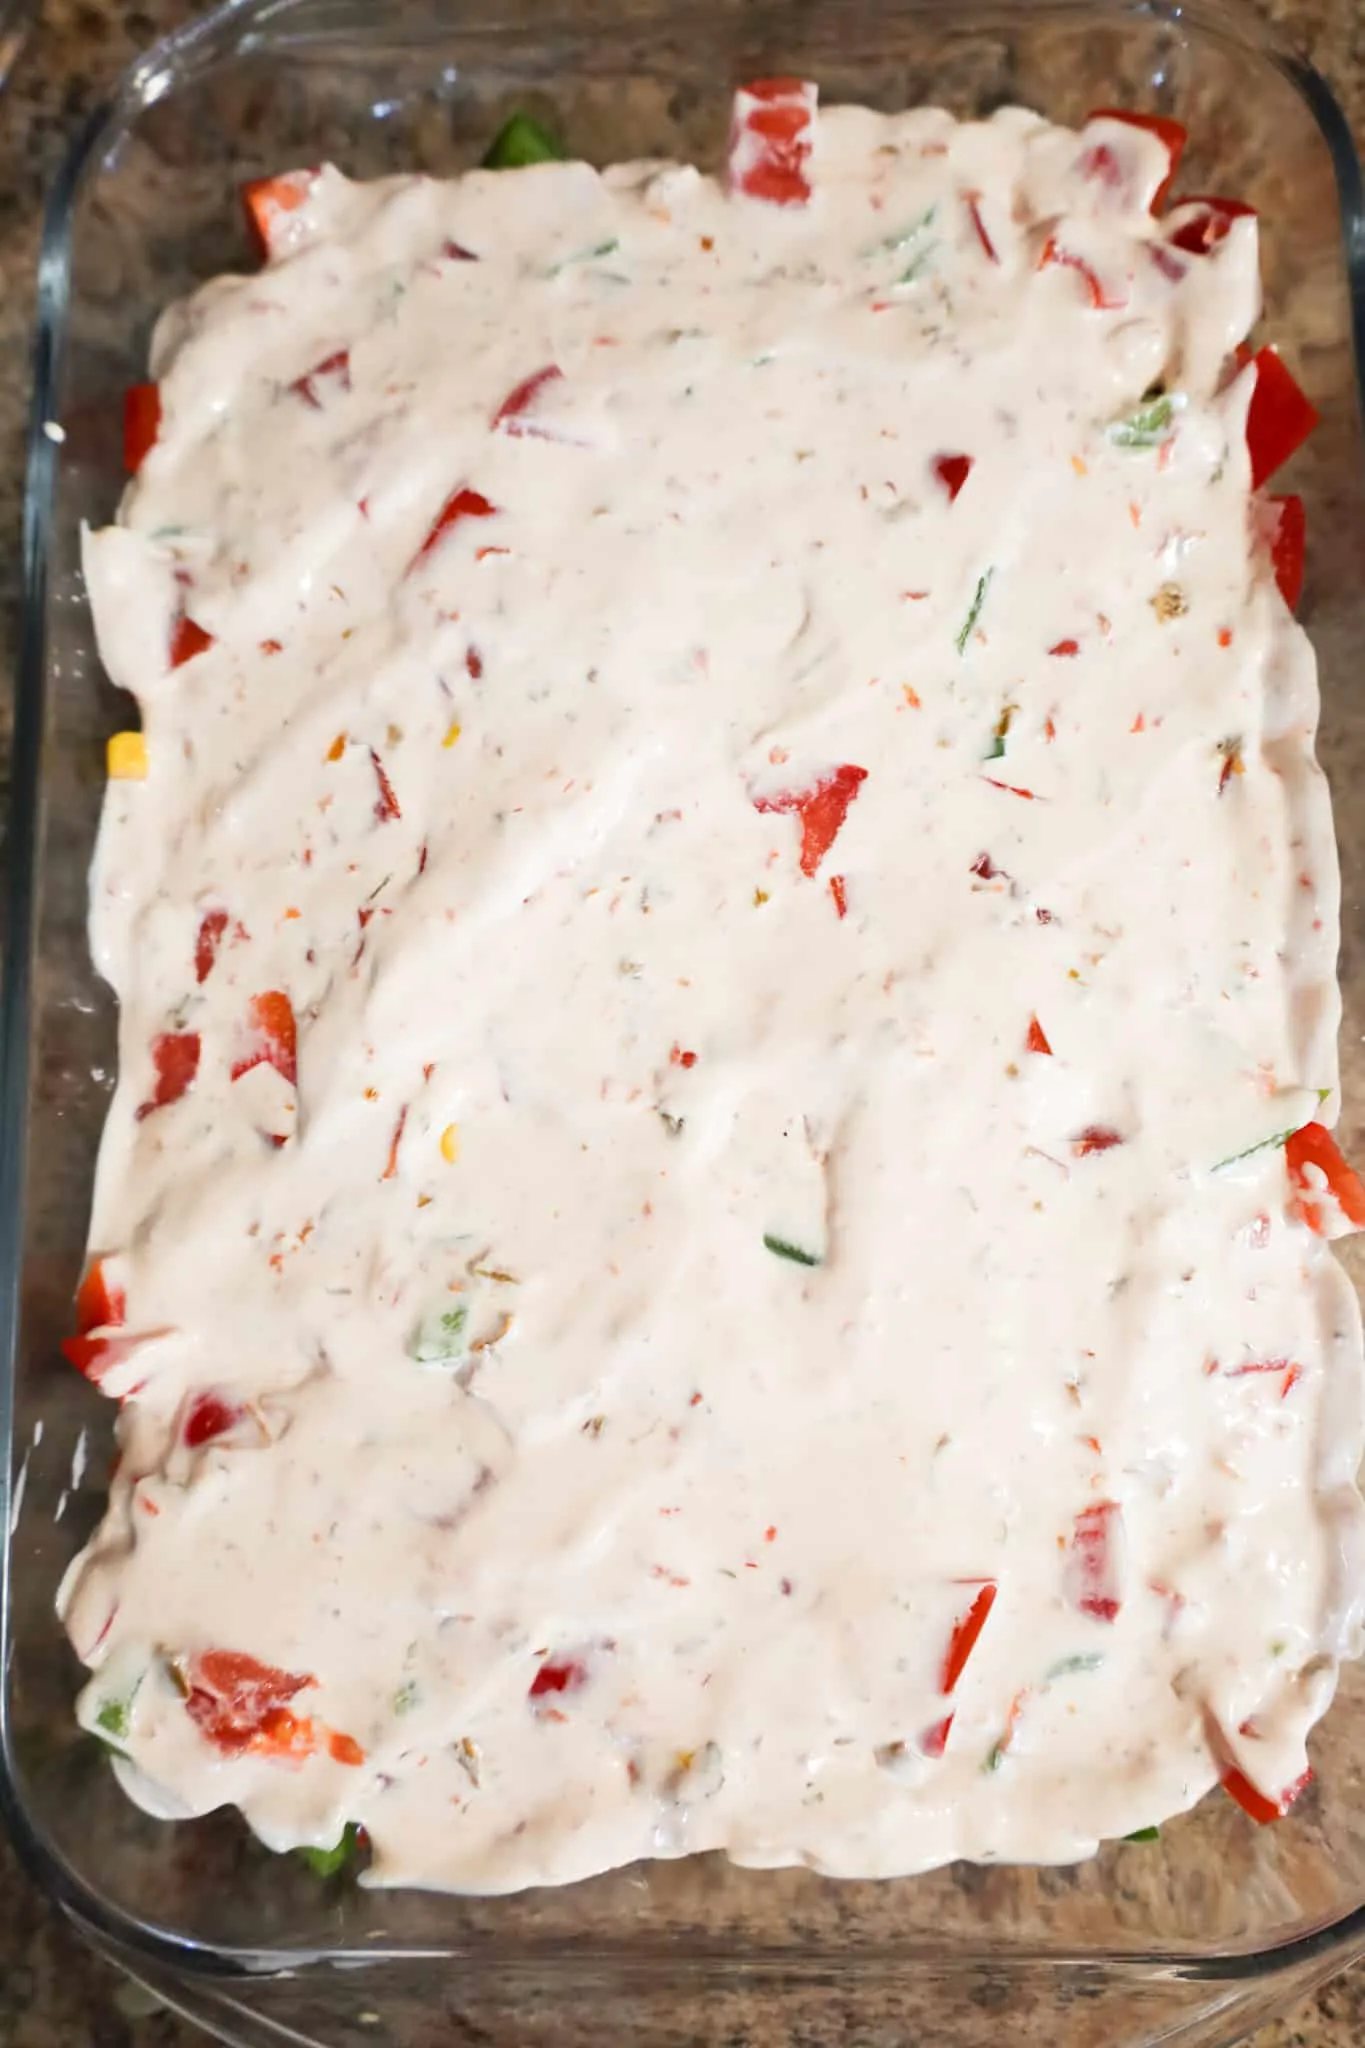 sour cream dressing mixture spread on top of vegetable mixture in a baking dish